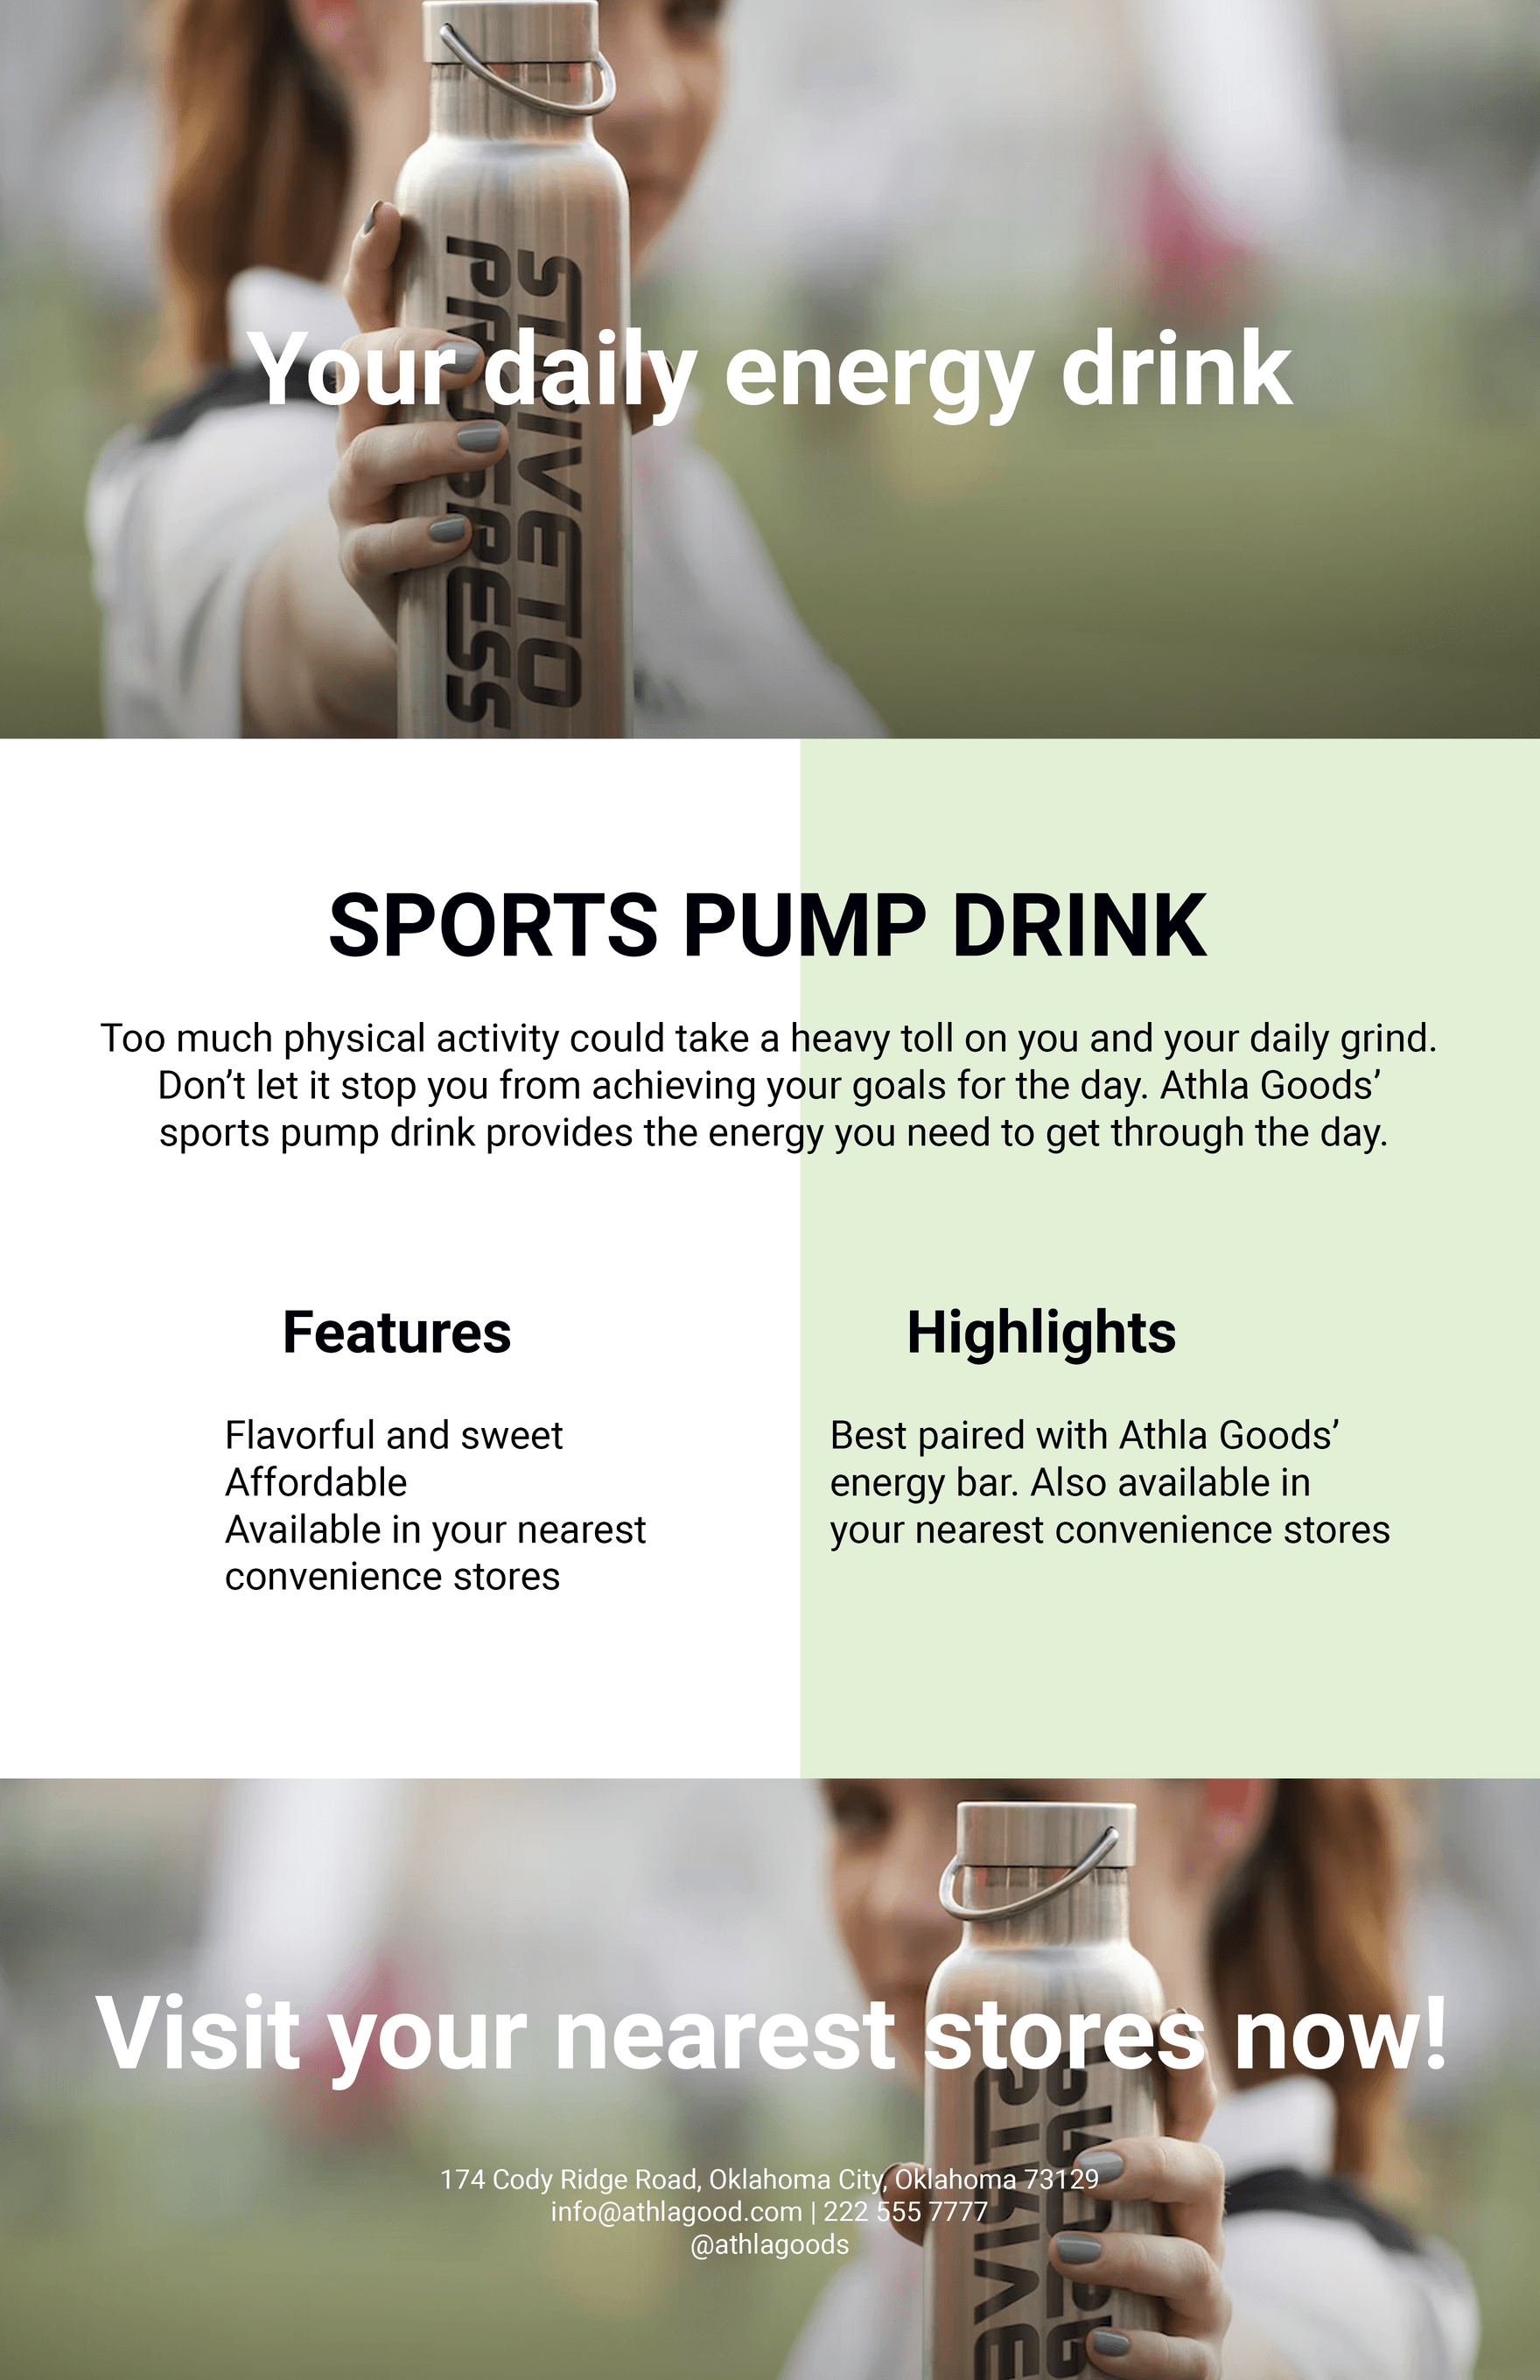 Free Sports Drink Product Sell Sheet Template in Word, Google Docs, Illustrator, PSD, Apple Pages, Publisher